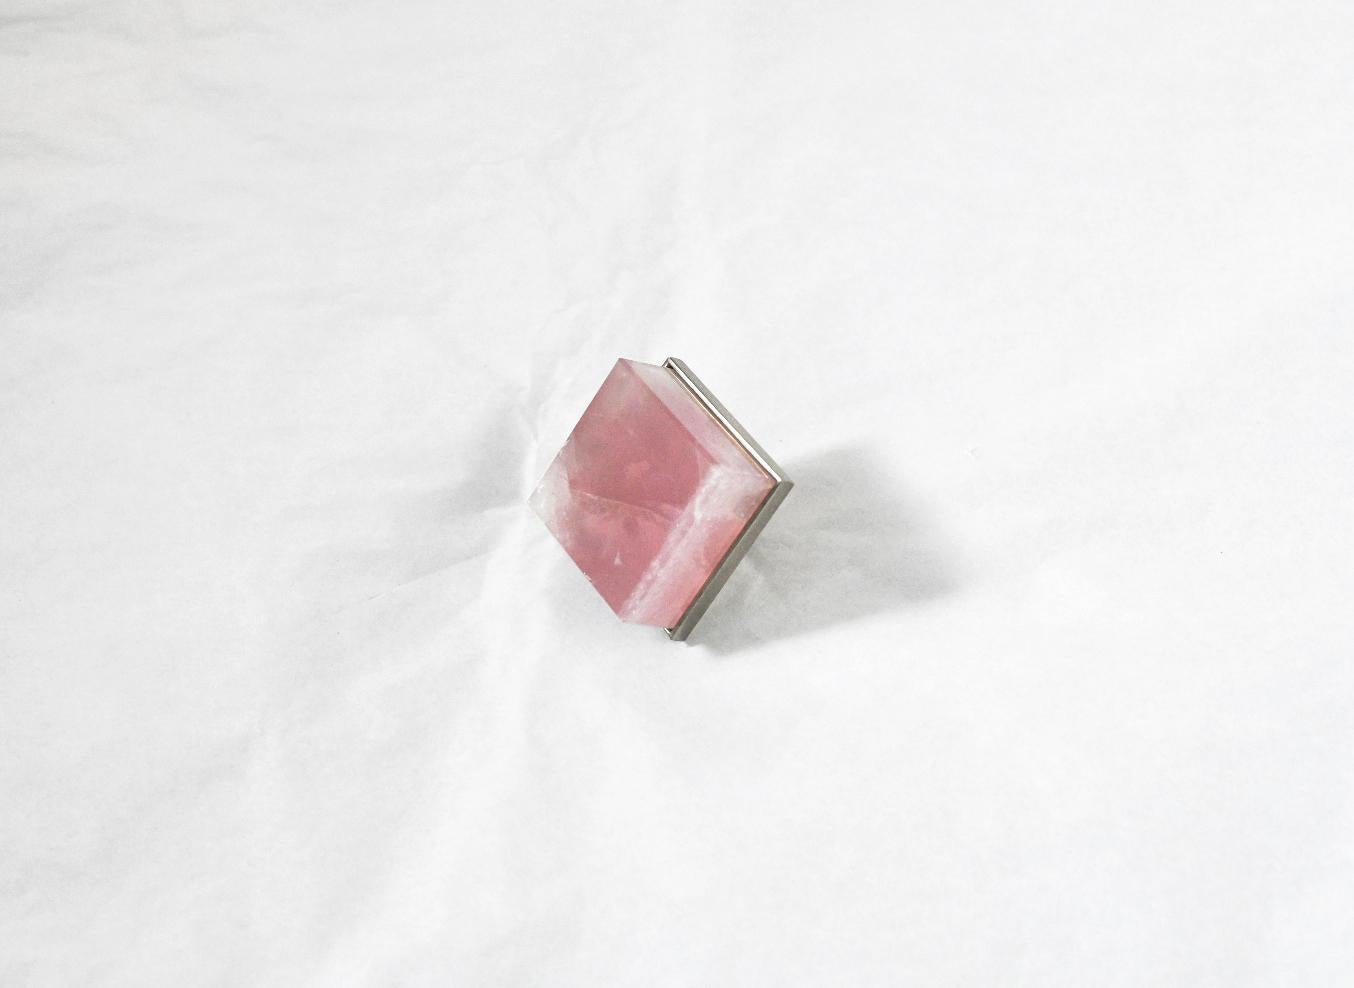 Cubic form rose rock crystal quartz knob with nickel plating base. Created by Phoenix Gallery, NYC.